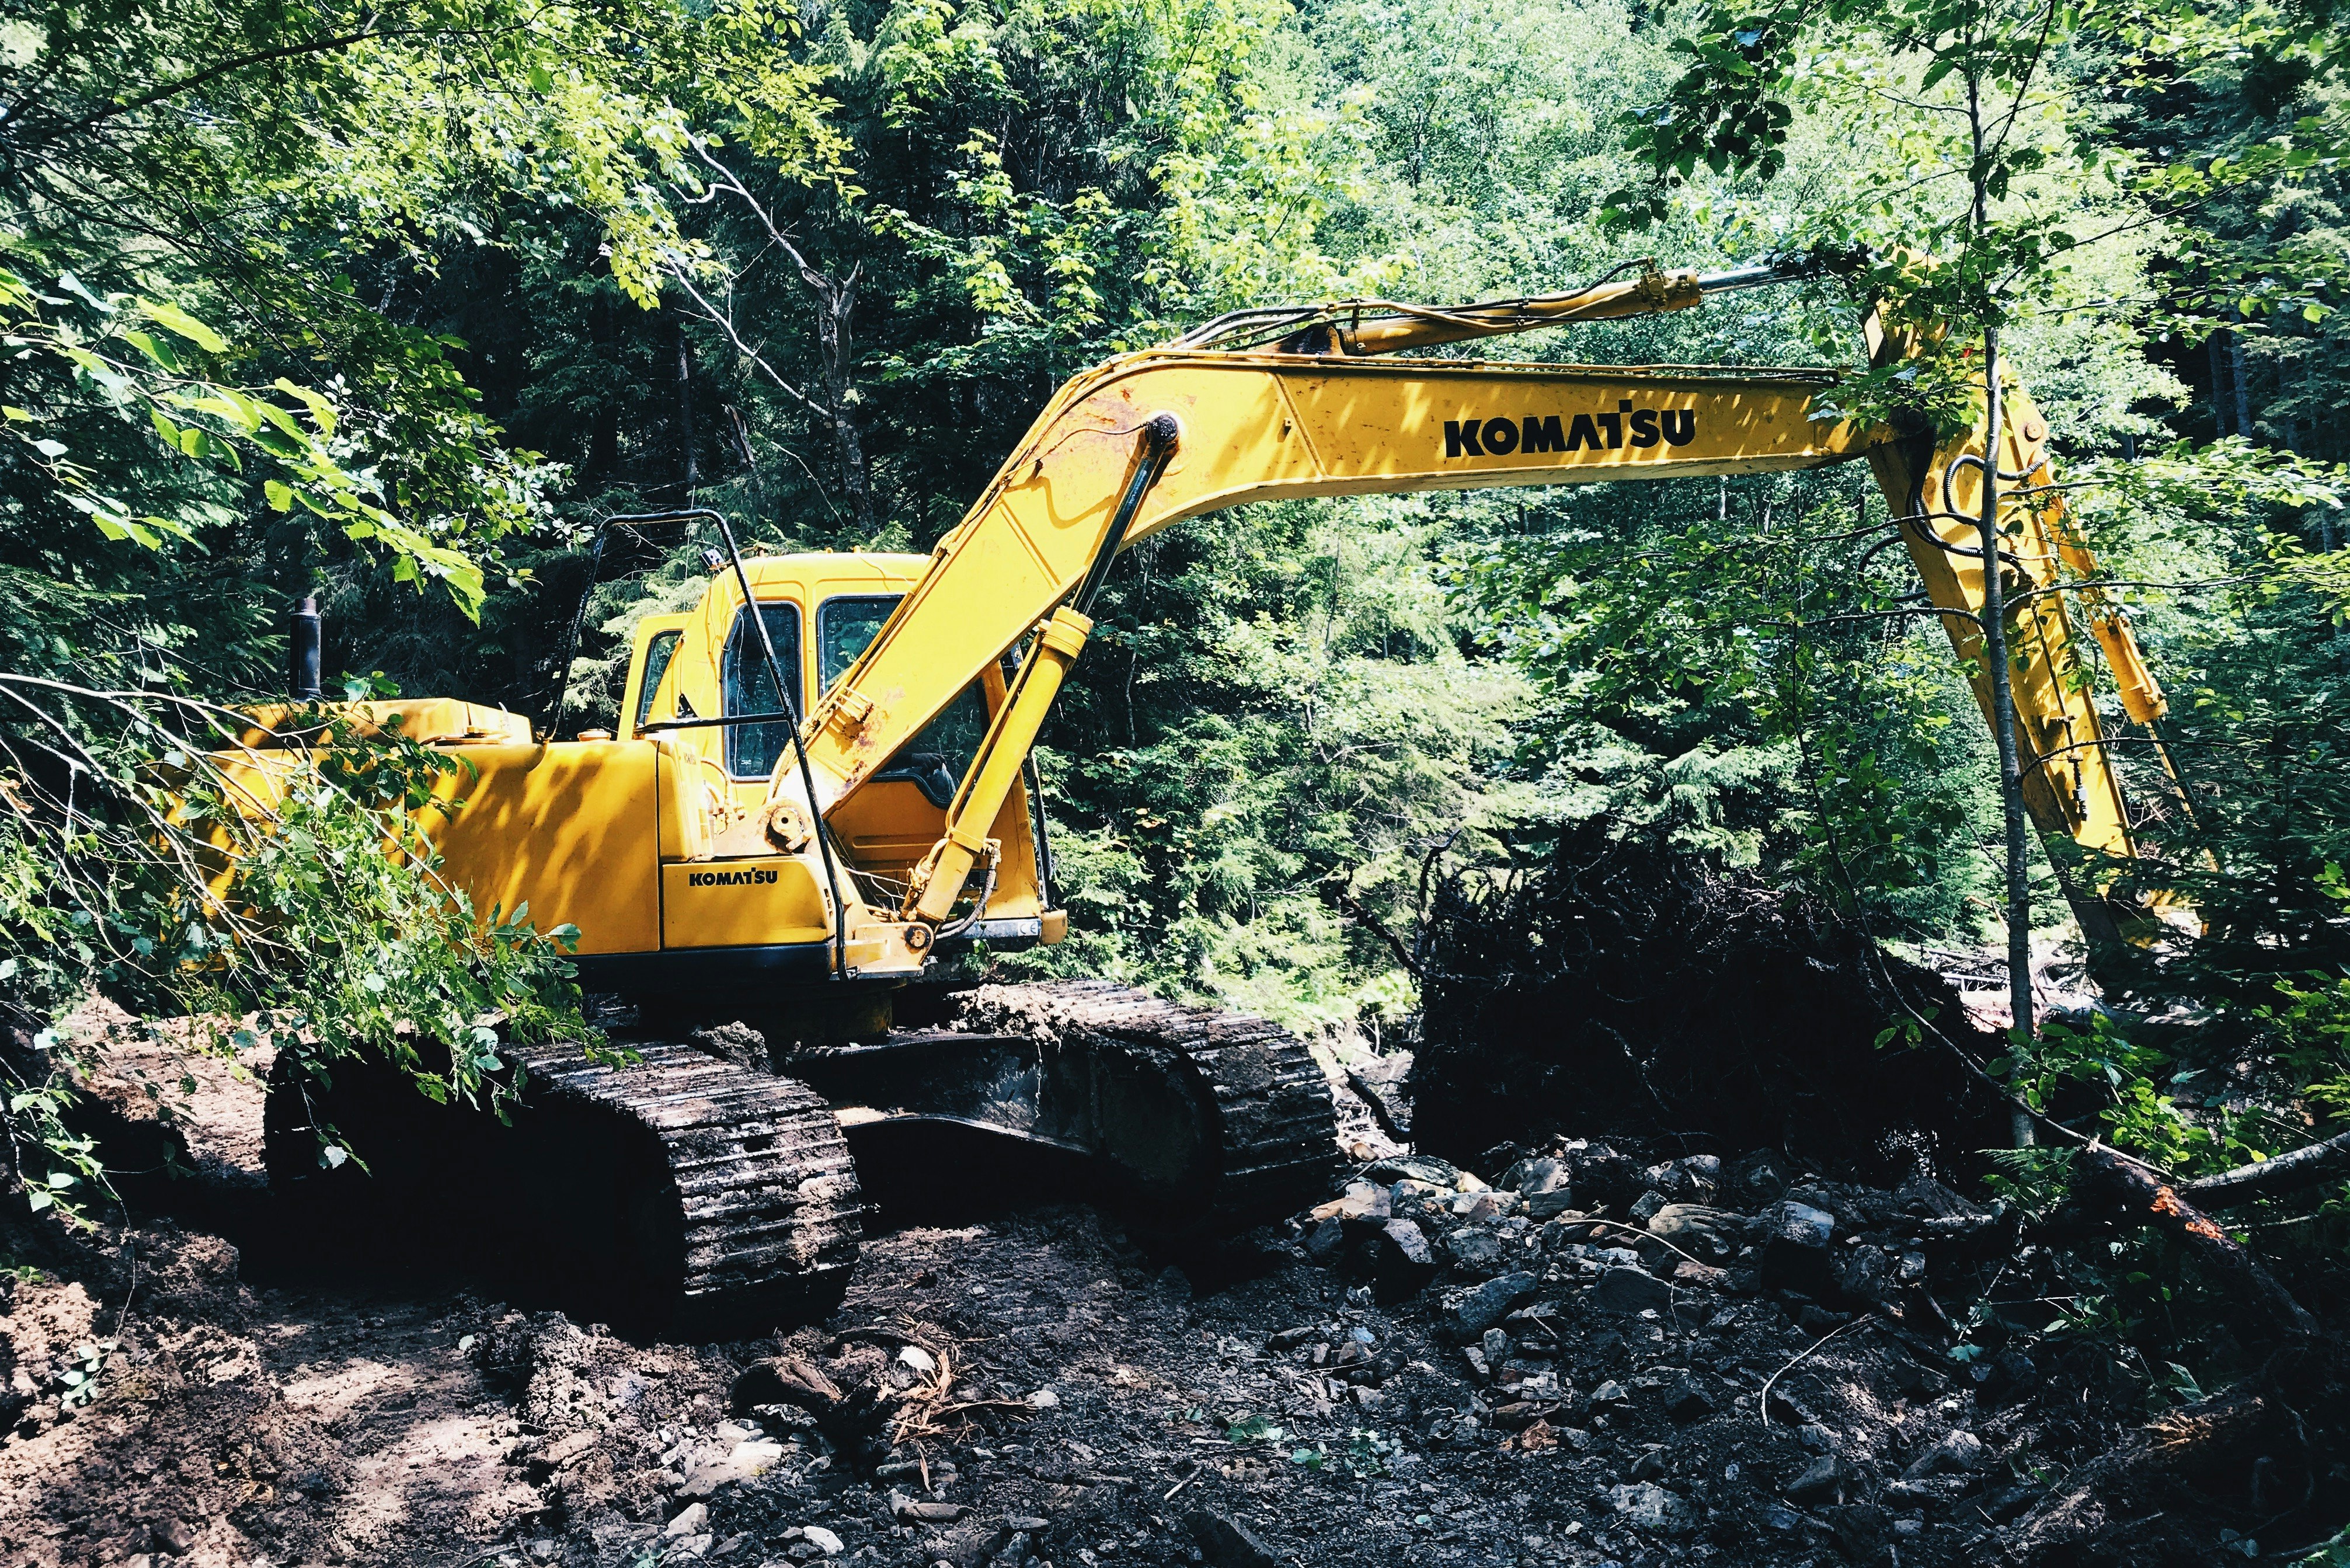 yellow Komatsu backhoe surrounded with tall and green trees